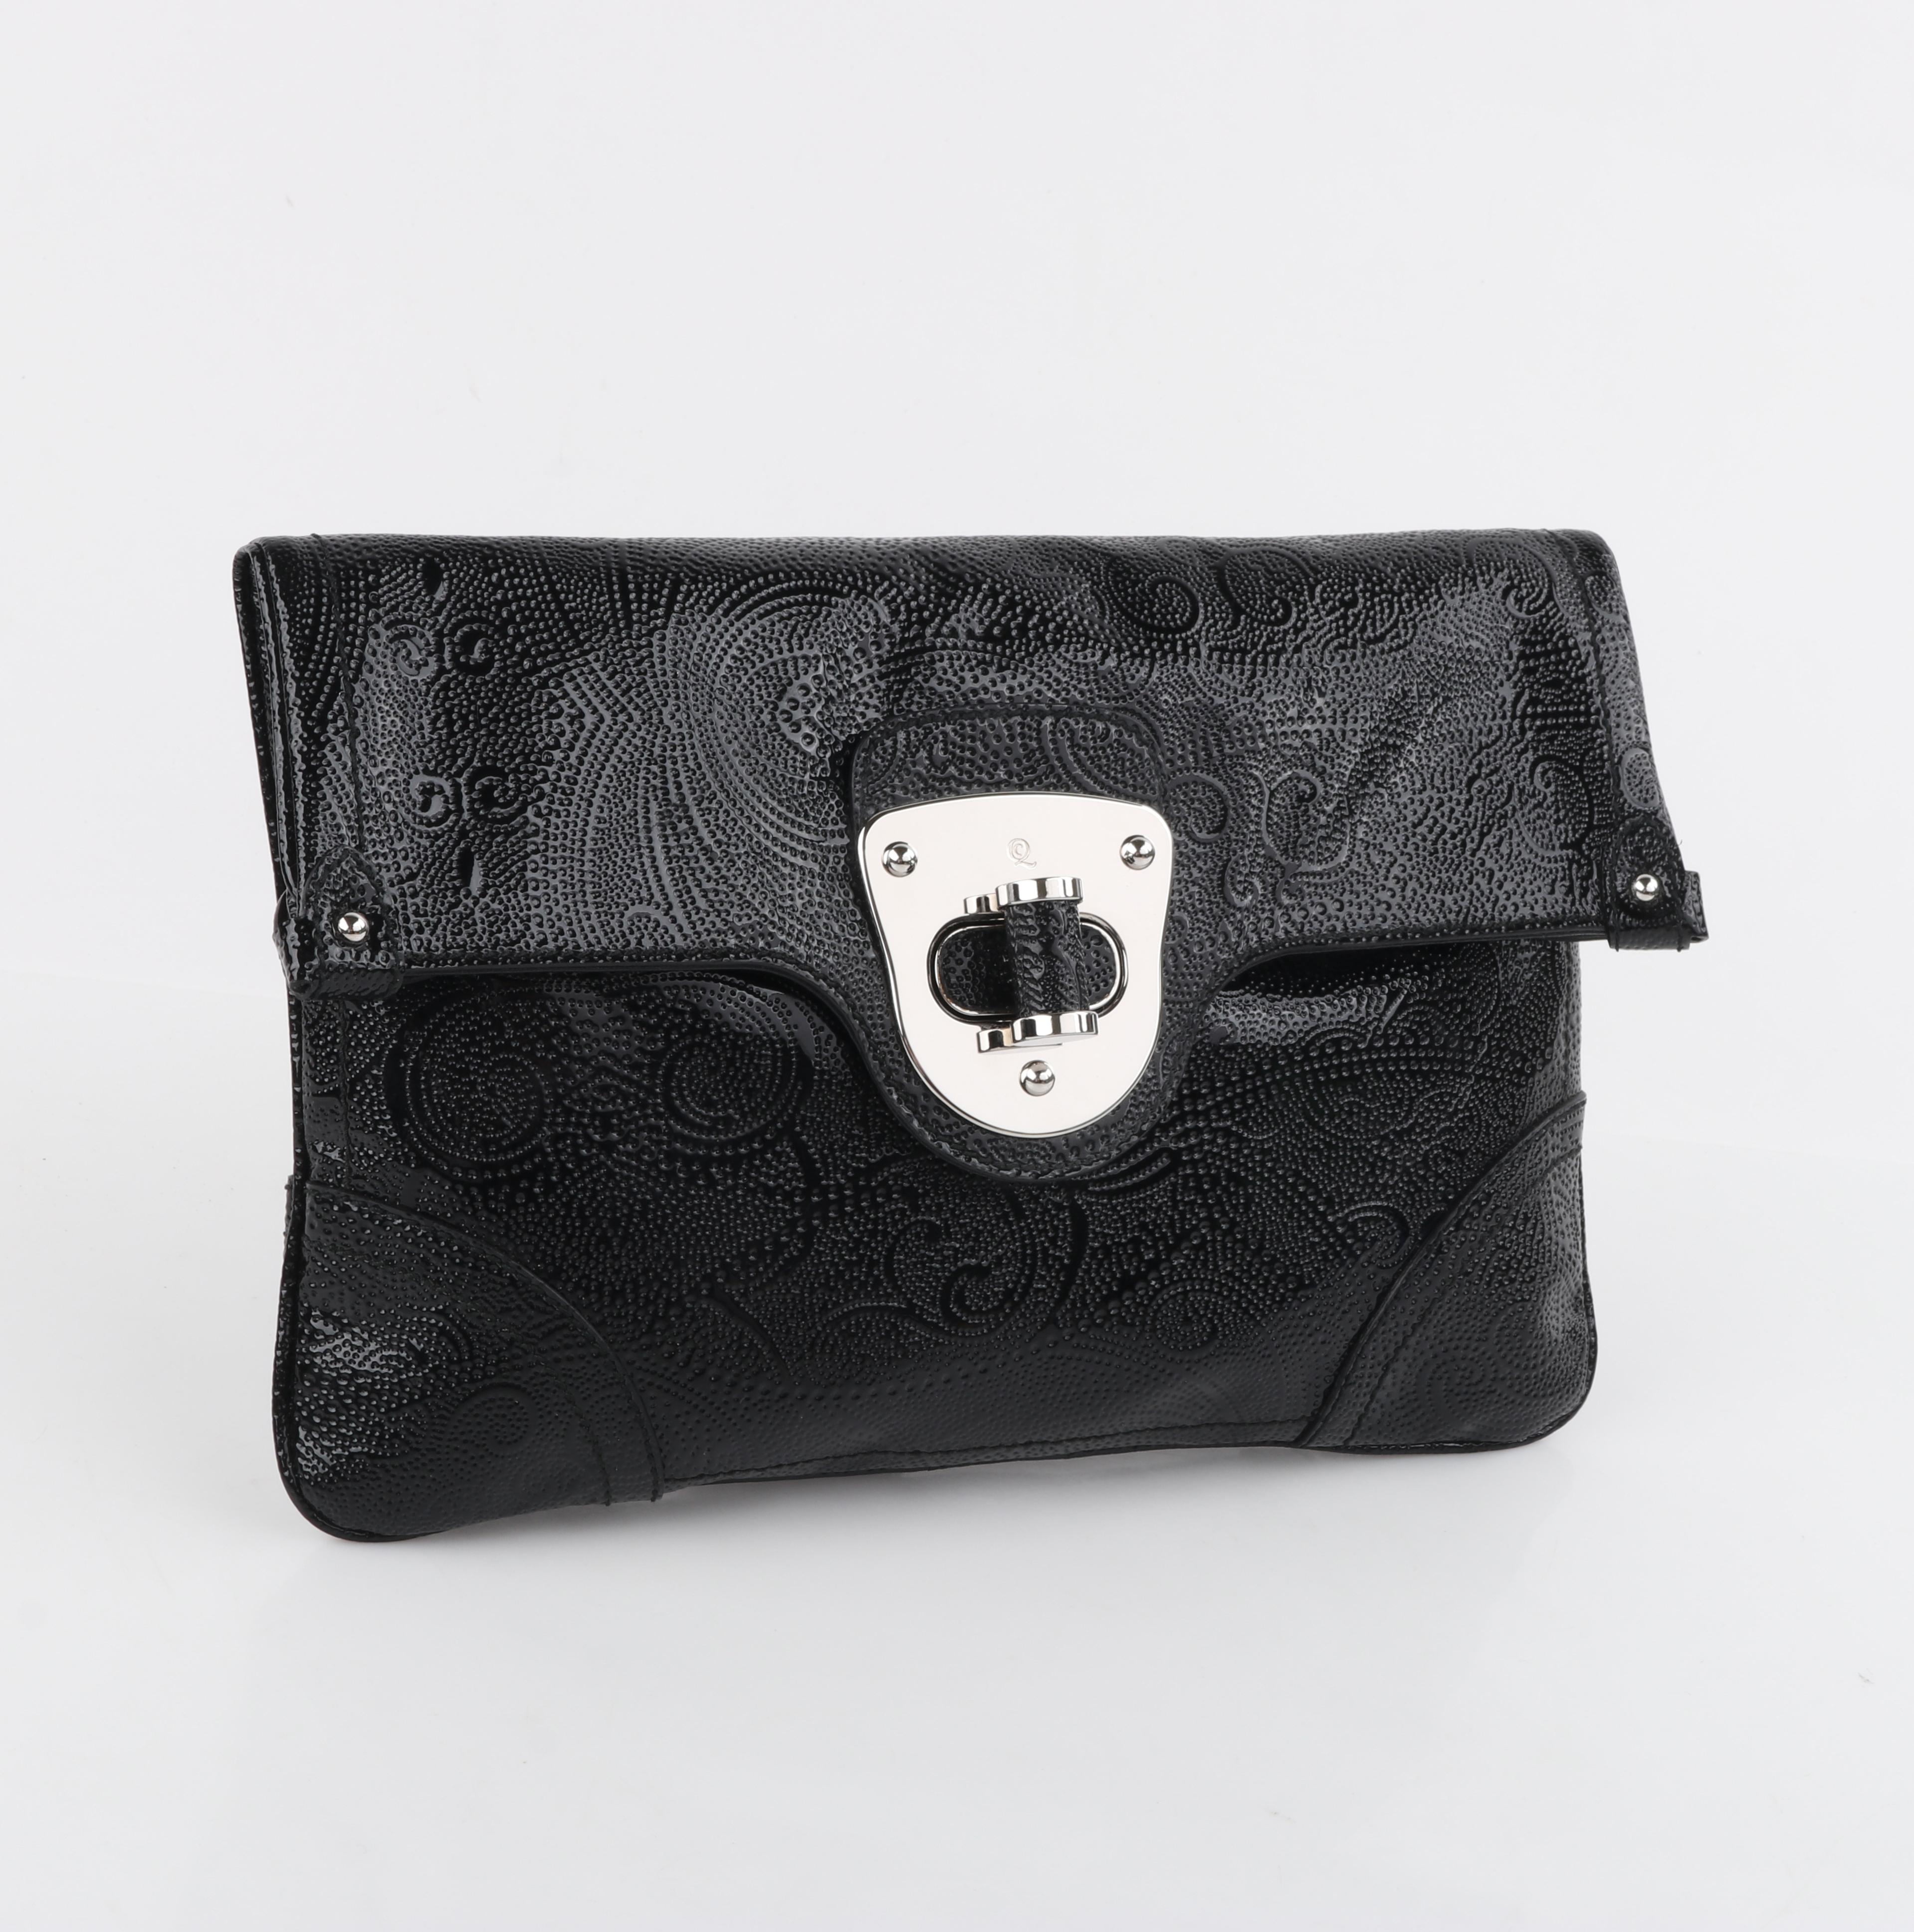 ALEXANDER McQUEEN c.2008 Black Leather Paisley Embossed Large Clutch Purse Bag In Good Condition For Sale In Thiensville, WI